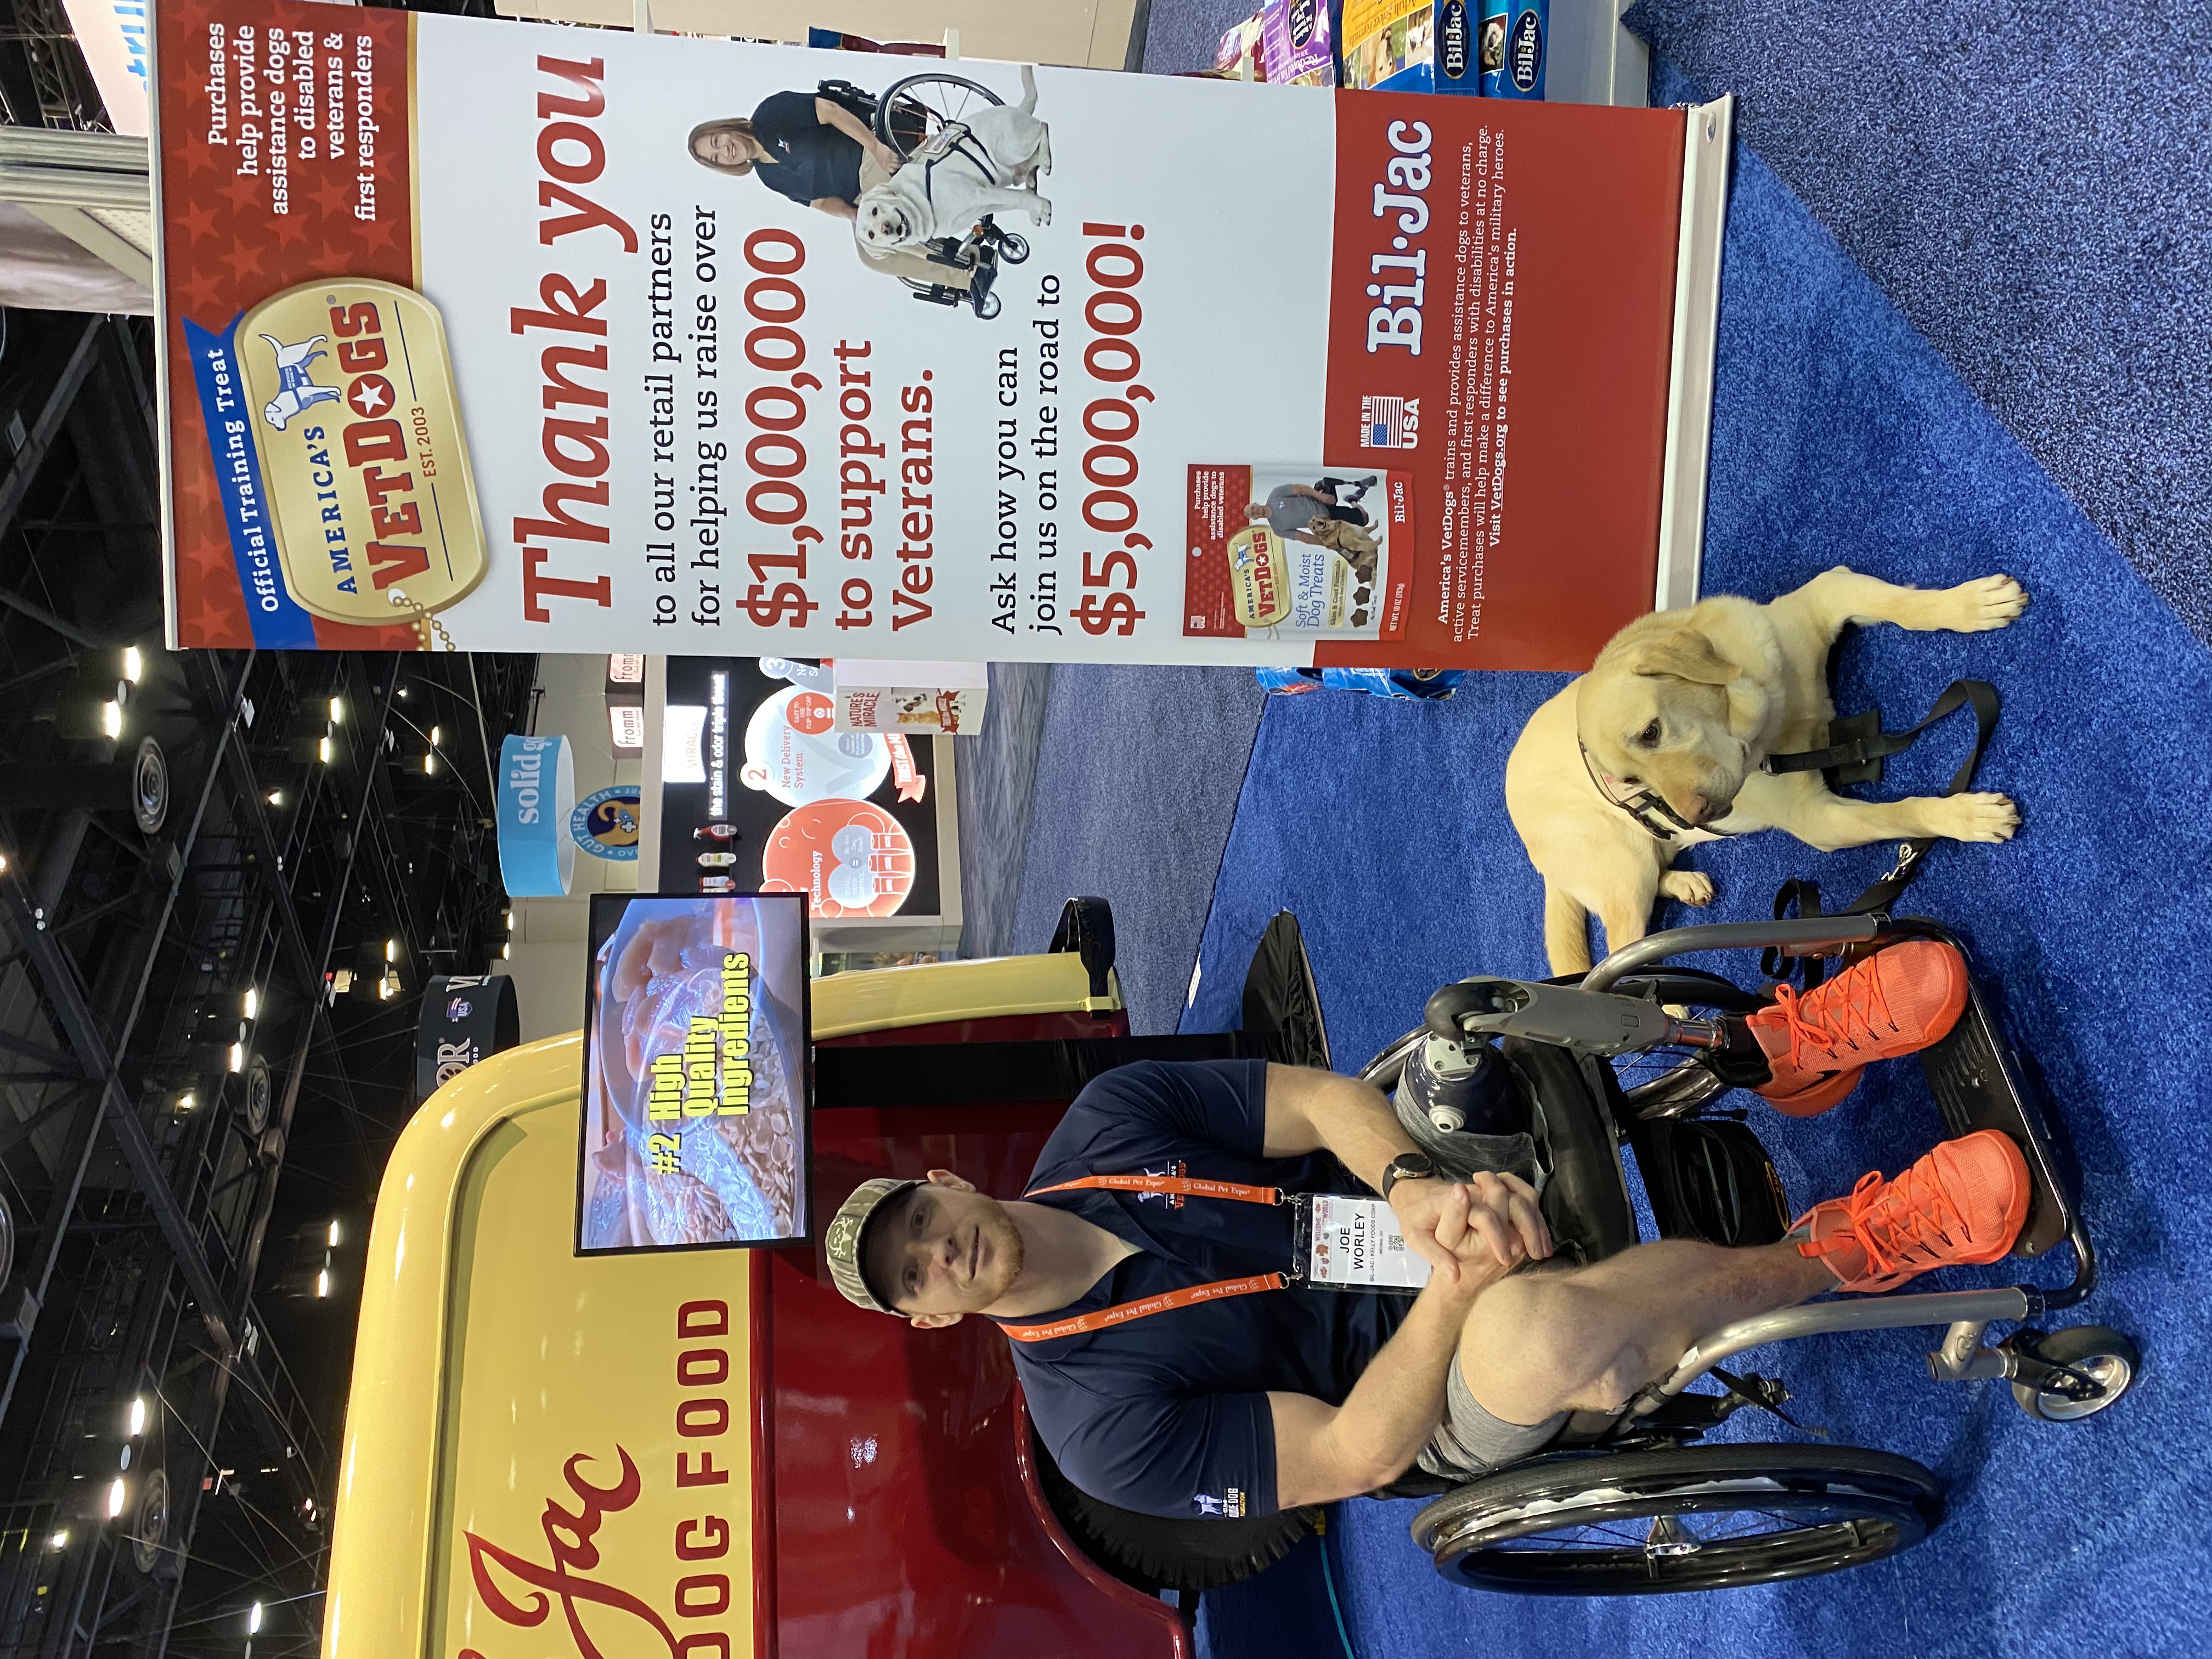 U.S. Navy Veteran and America's VetDogs client Joe Worley with service dog Galaxie at Bil-Jac's exhibit at Global Pet Expo in Orlando, Florida 2019. 